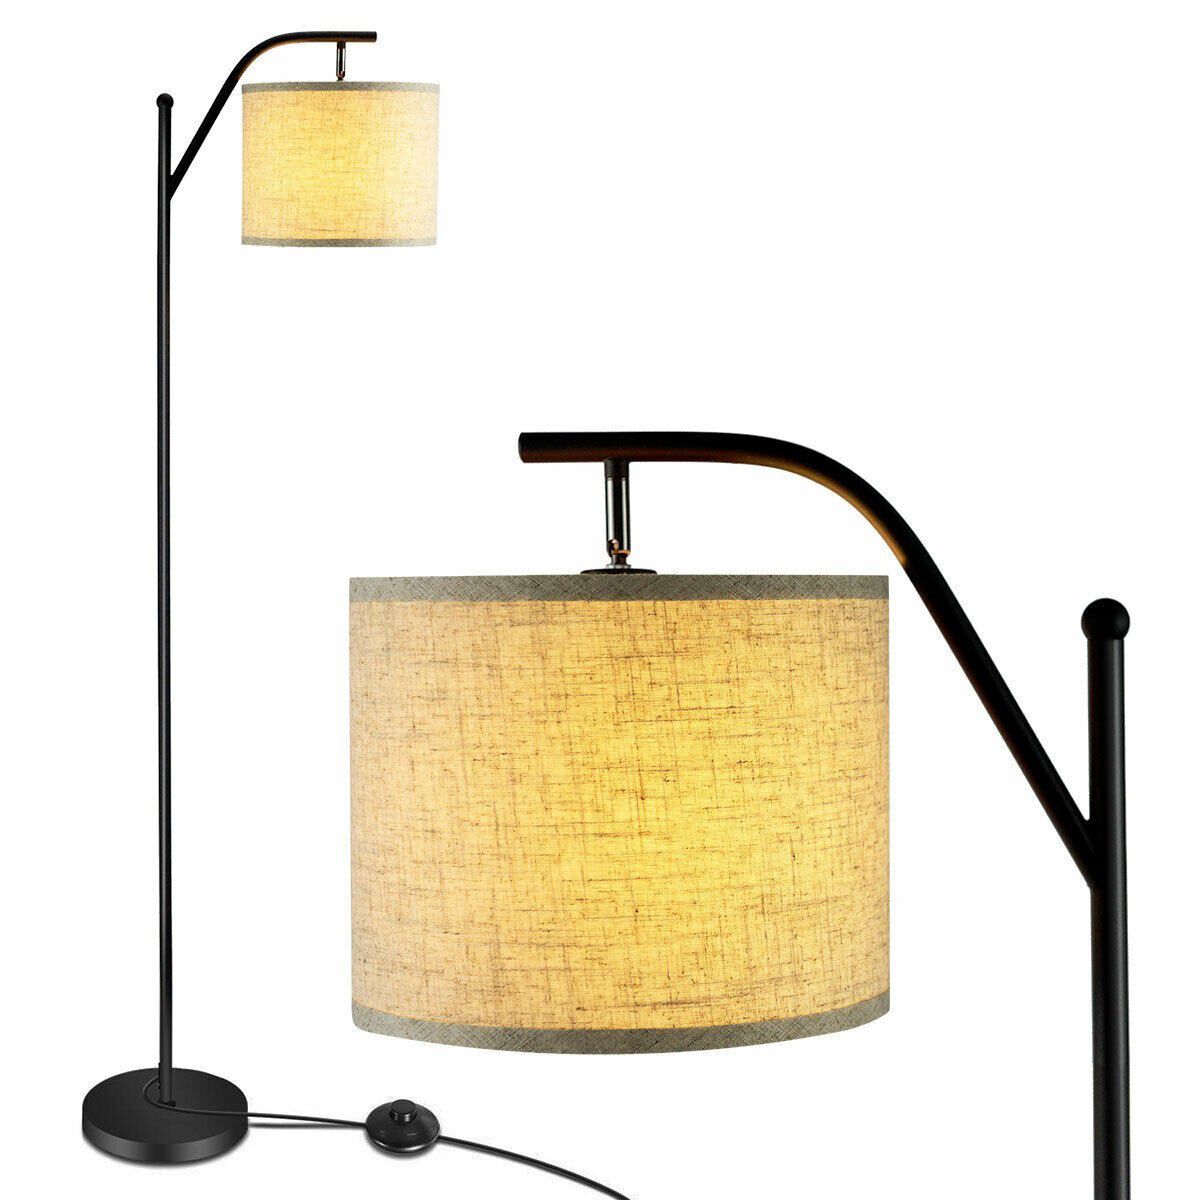 Easy to Assemble & Stable Hanging Floor Lamp